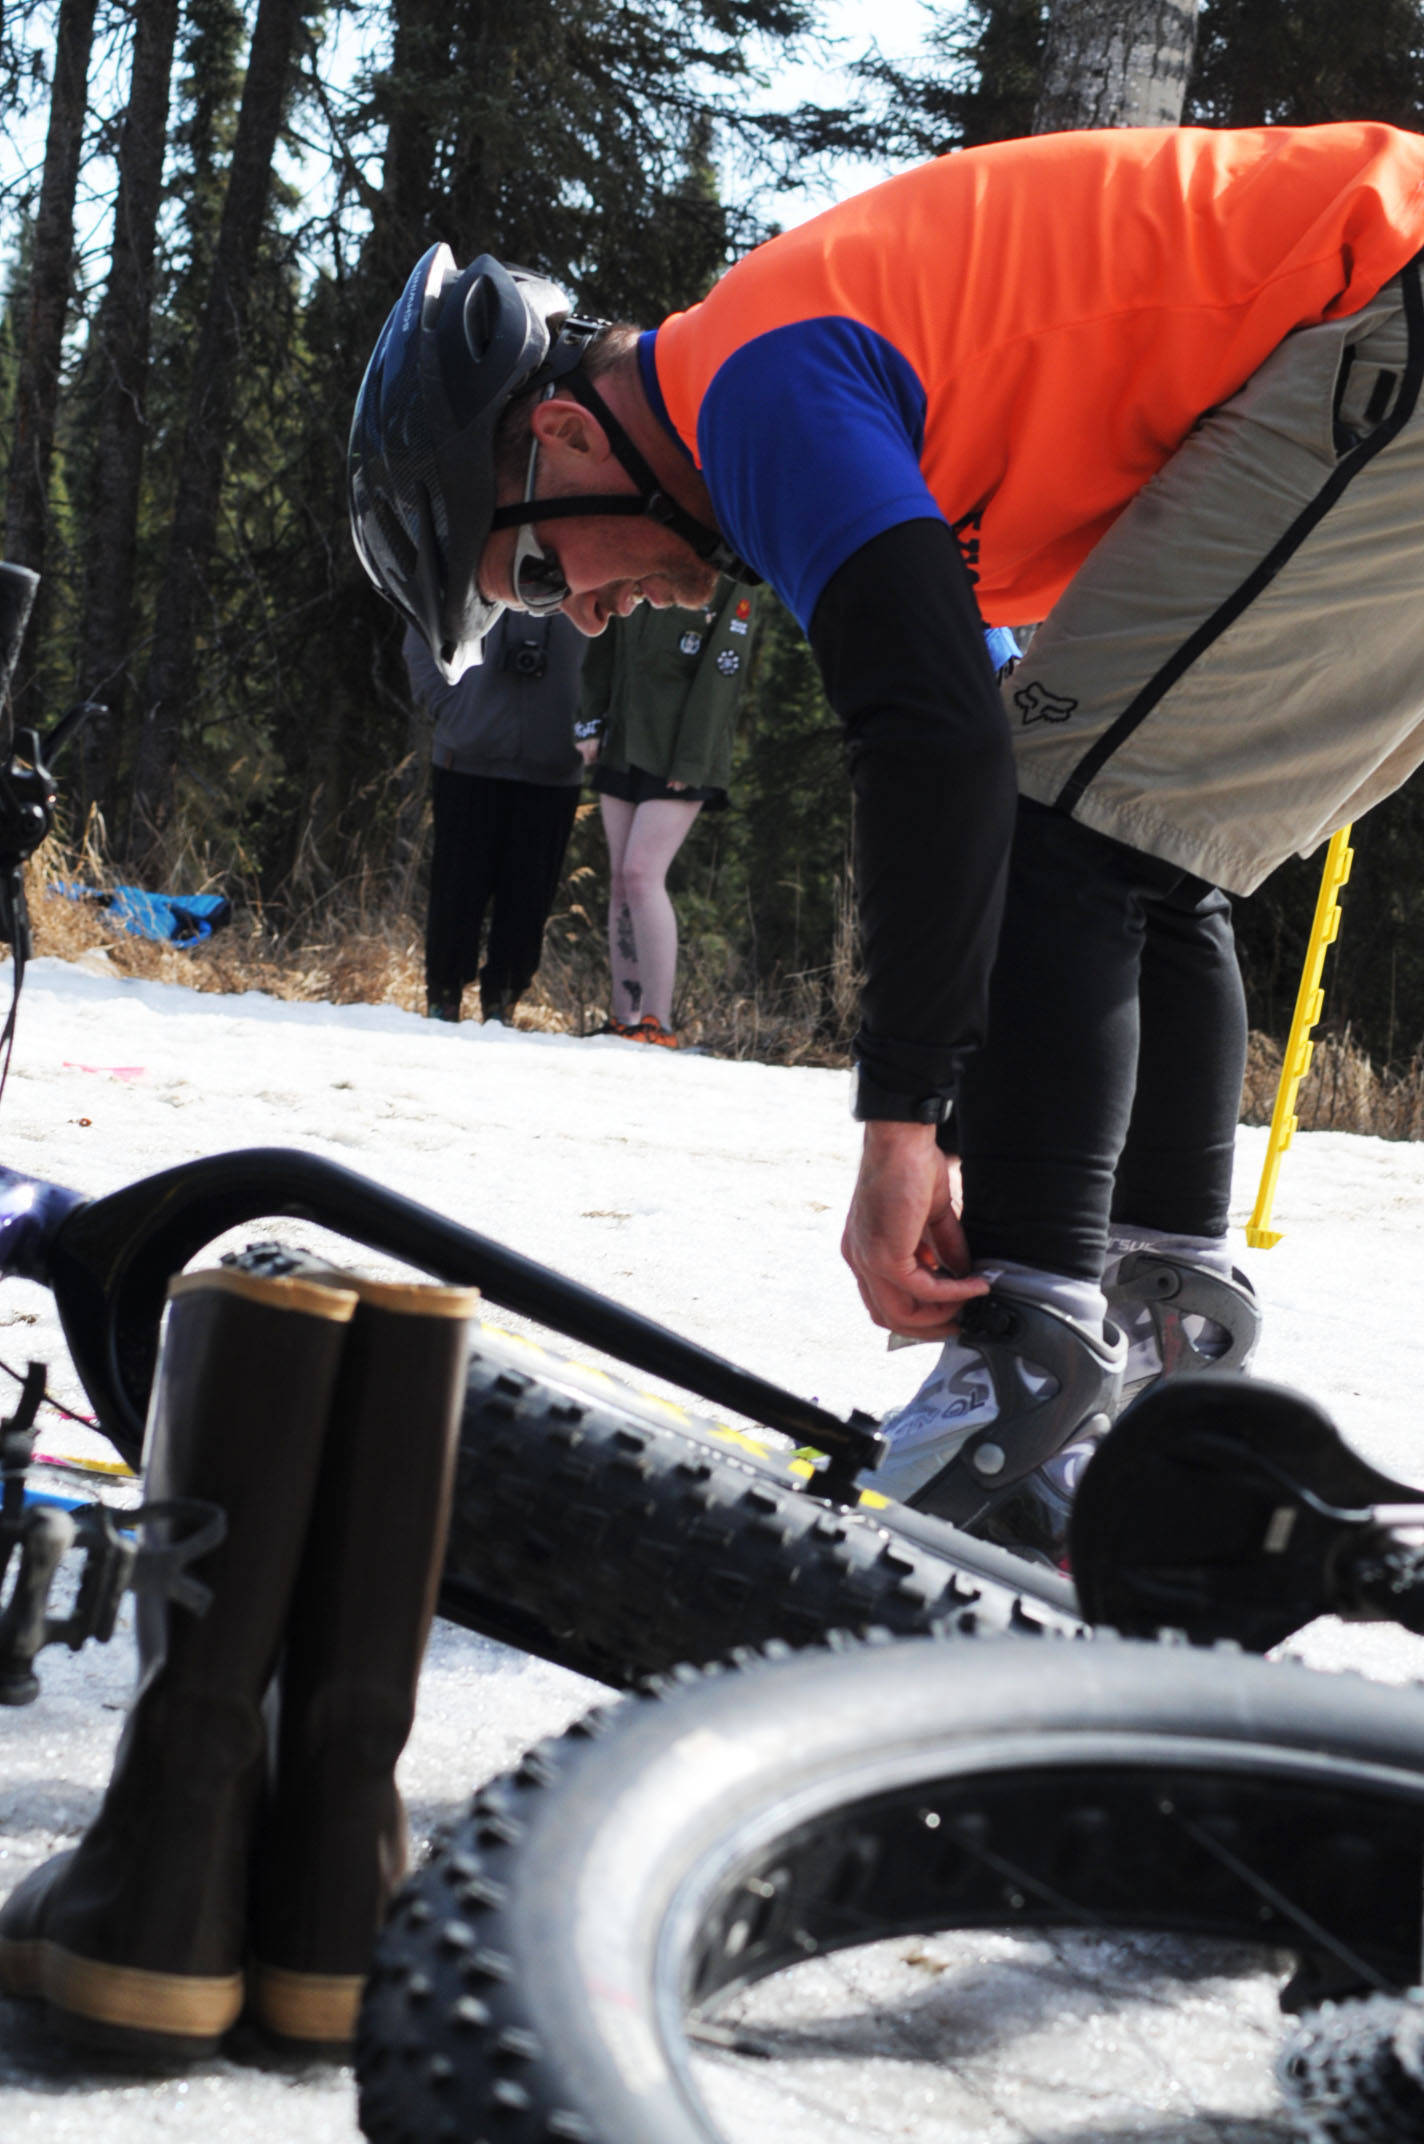 Anthony Murray swaps out his ski boots for Xtratuffs on the Wolverine Trail during the 2018 Choose Your Weapon race at Tsalteshi Trails on Sunday, April 15, 2018 in Soldotna, Alaska. Racers completed two 5-kilometer laps around the lower trails by running, biking or skiing, with the option of switching between laps for extra points. Most of the trails had some snow with patches of wet mud sprinkled throughout as spring temperatures begin to dominate the central Kenai Peninsula. Murray later said he was grateful for the Xtratuffs when navigating through an icy puddle up to his mid-calf. (Photo by Elizabeth Earl/Peninsula Clarion)